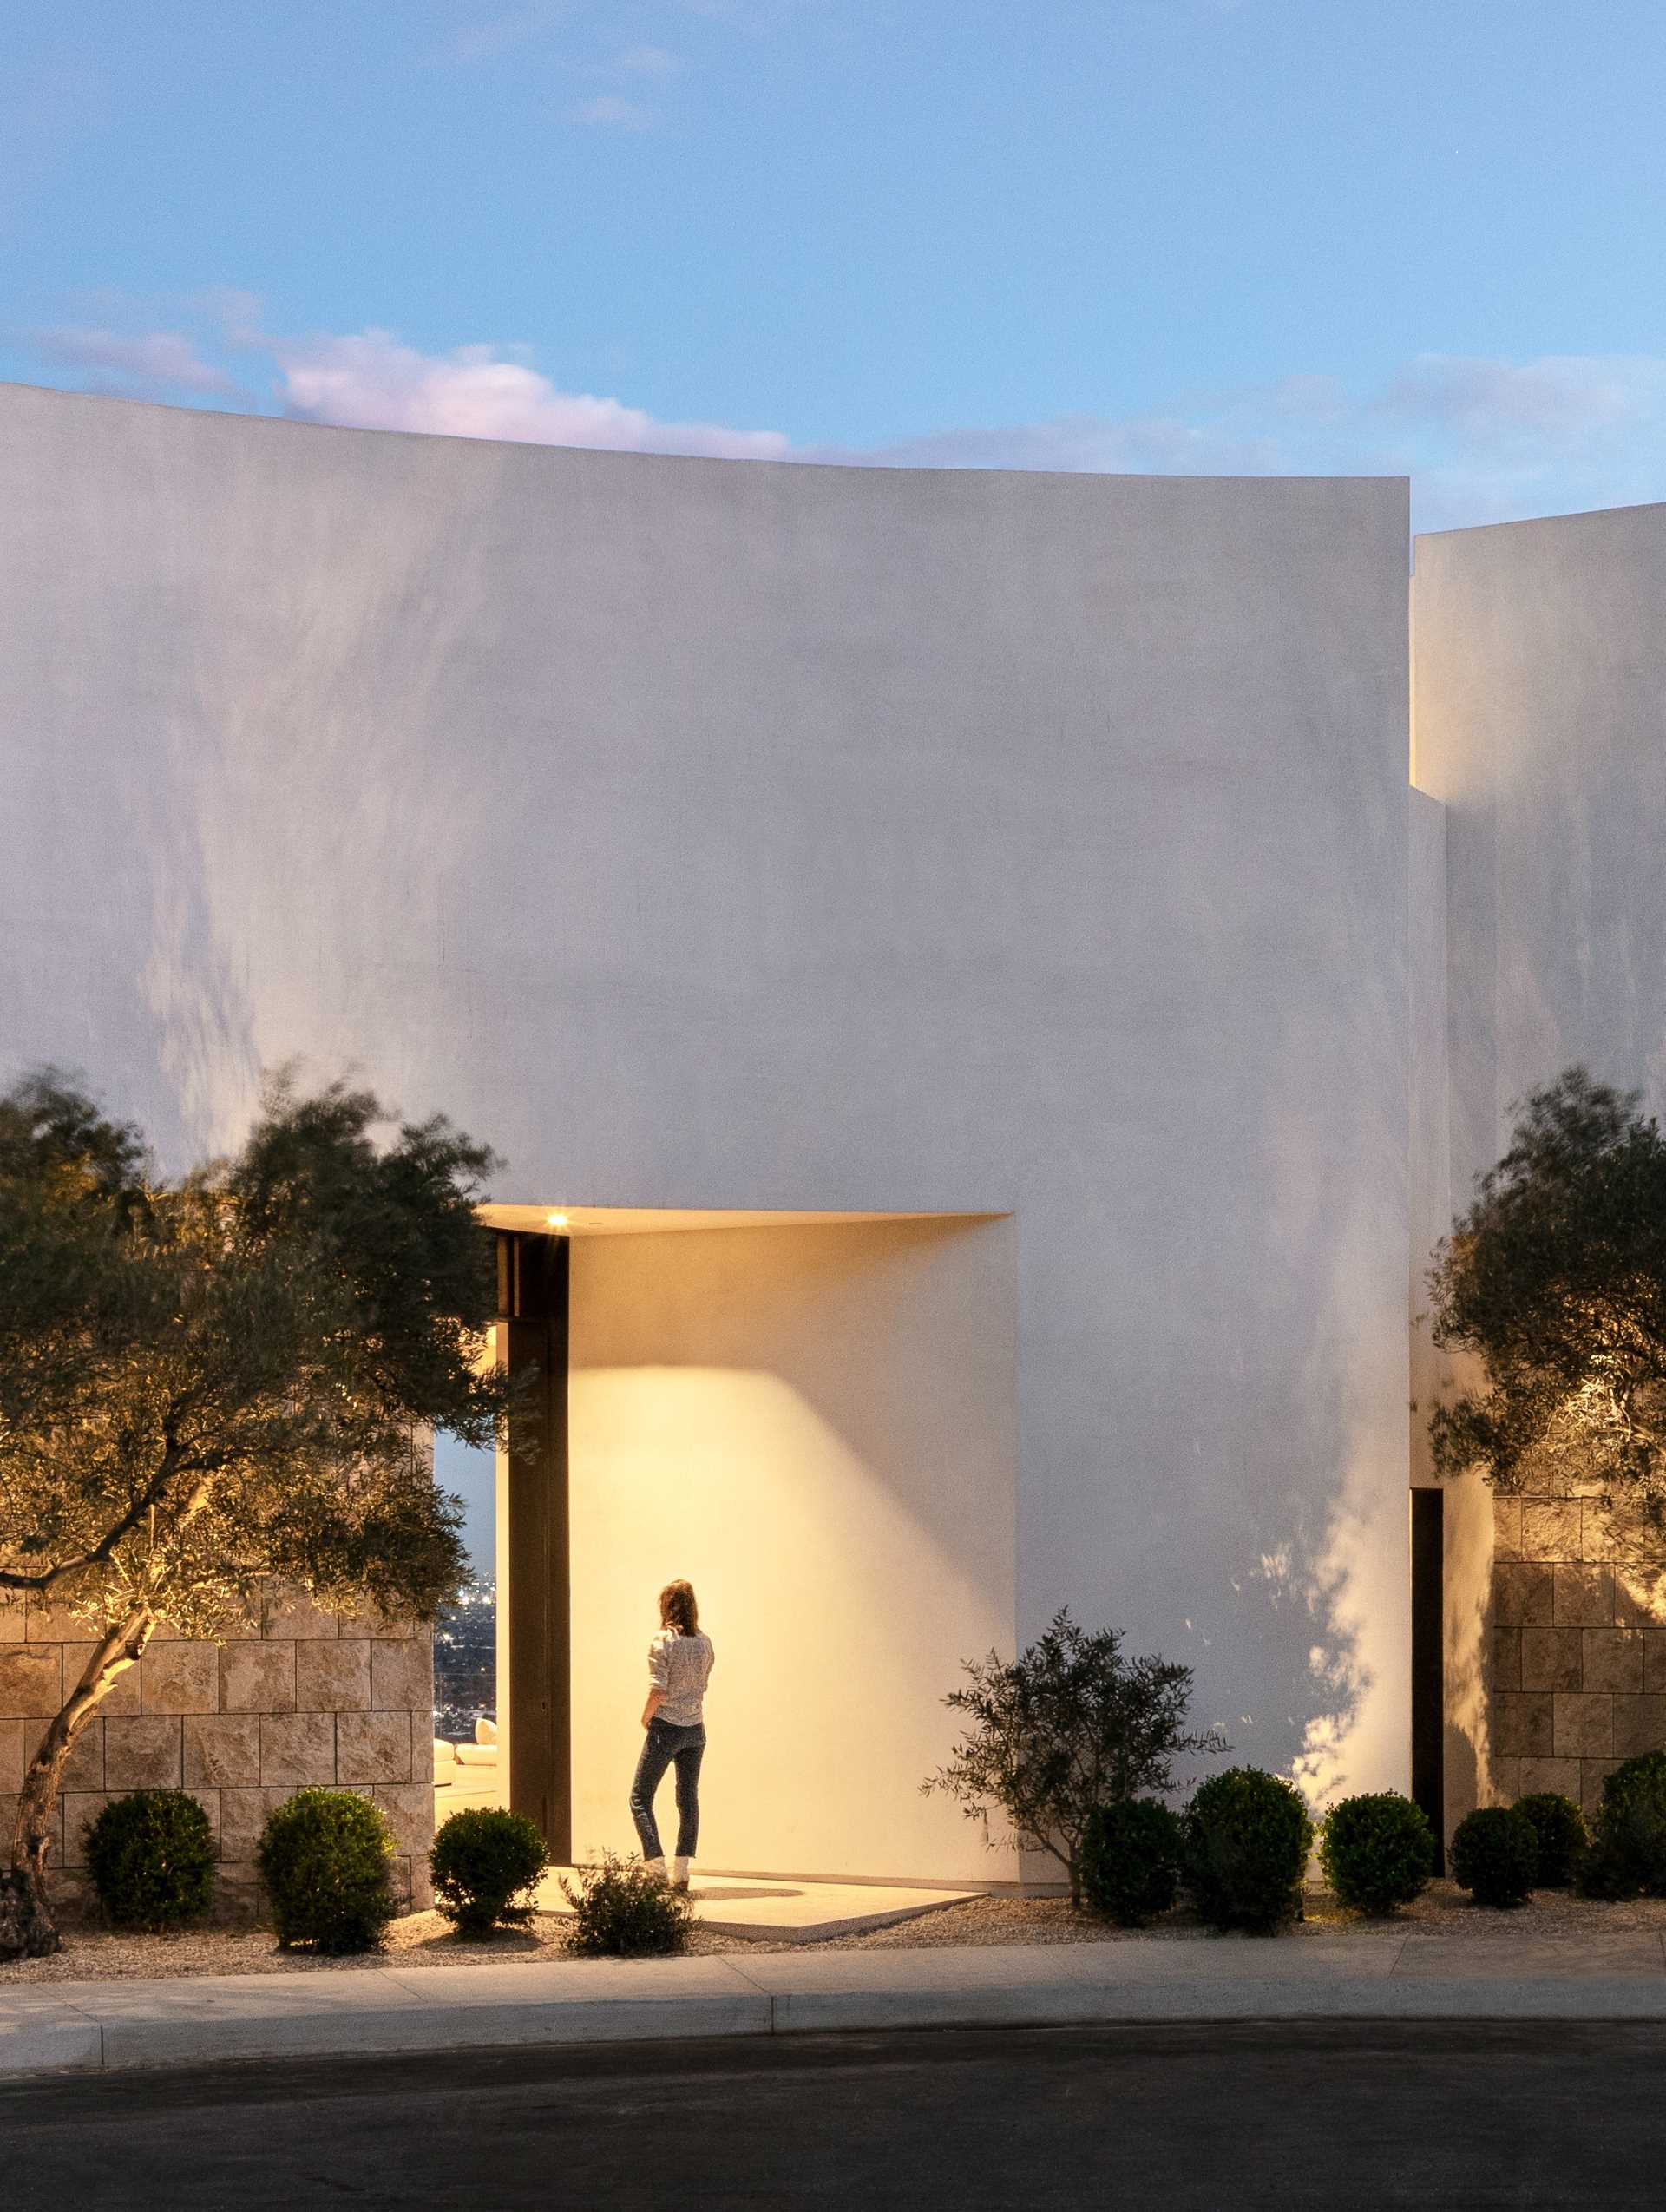 Upon arriving at the home, there's large curved white walls accented by stone and olive trees, with the entryway highlighted by lighting.